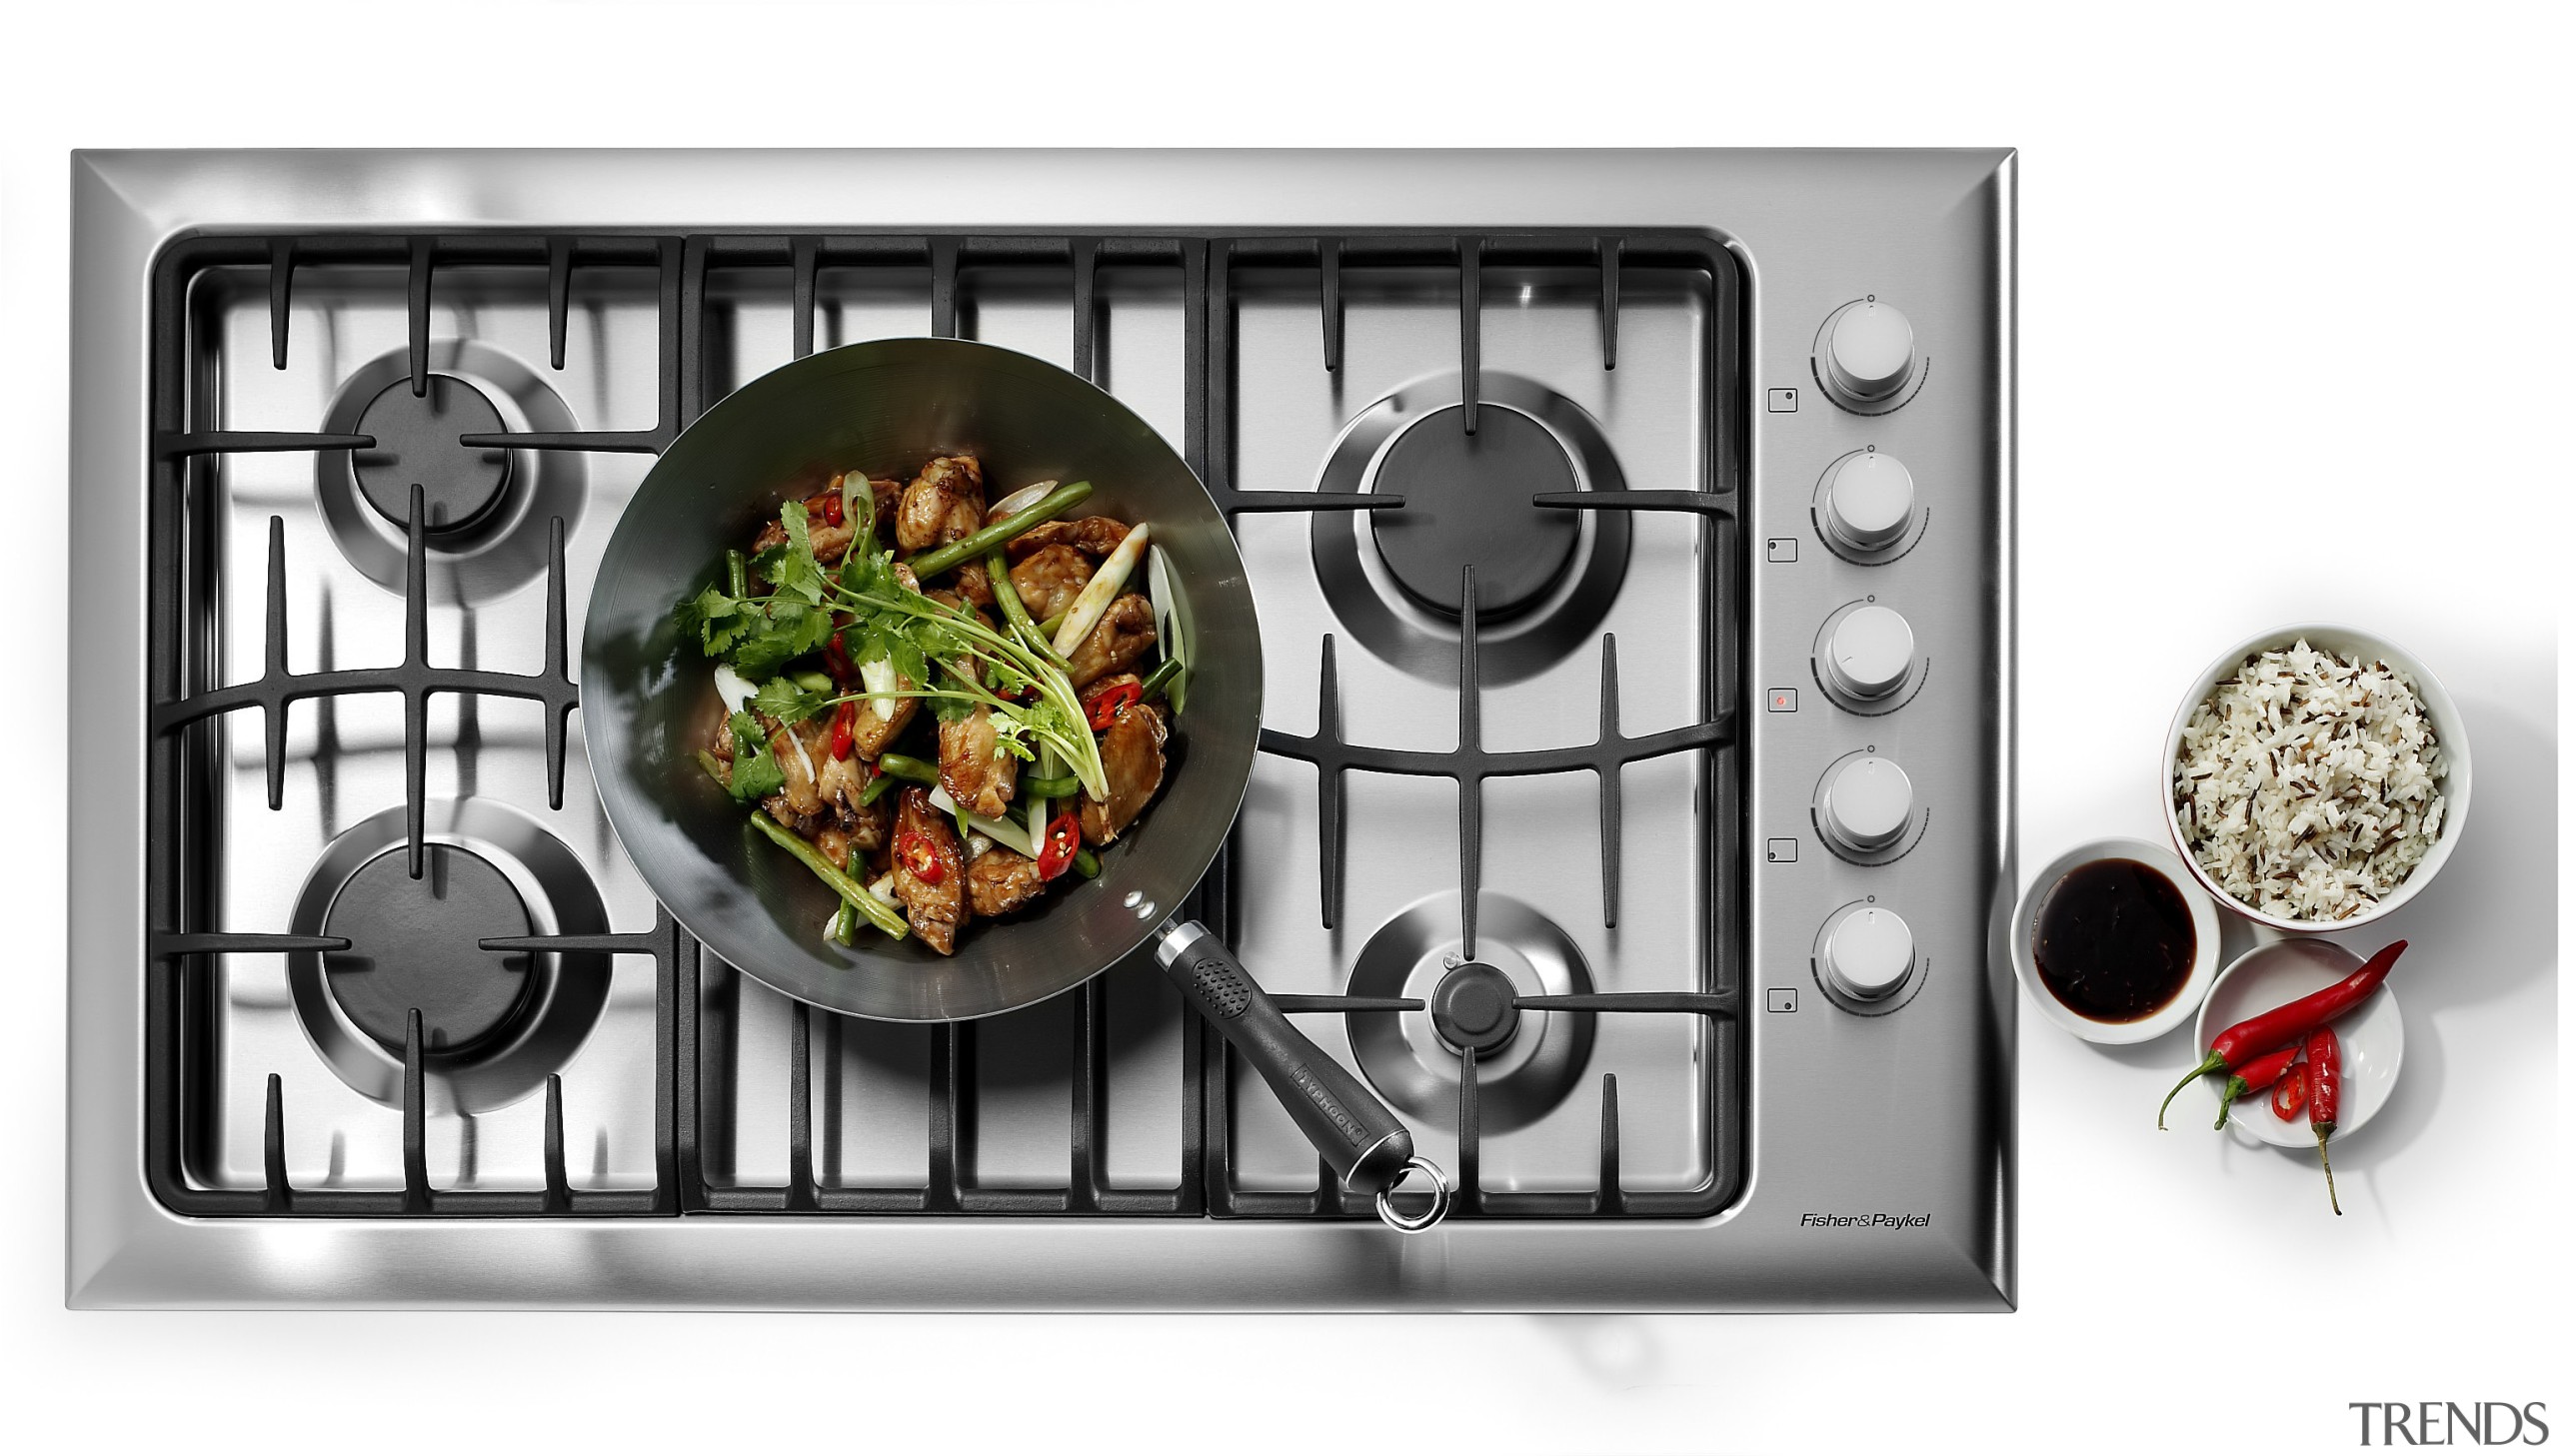 View of the CG365 gas cooktop from Fisher kitchen appliance, product, white